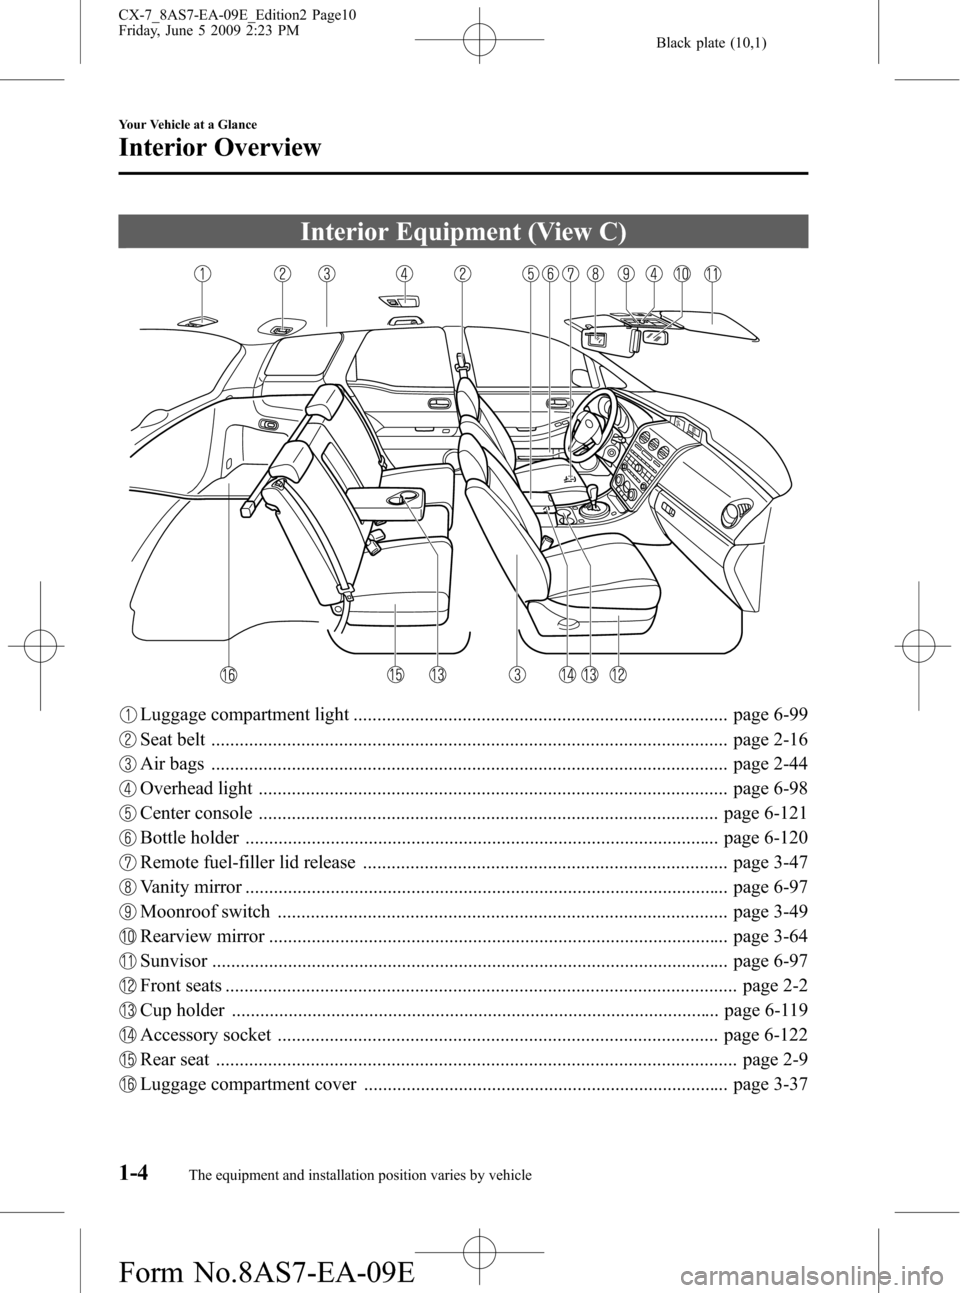 MAZDA MODEL CX-7 2010  Owners Manual (in English) Black plate (10,1)
Interior Equipment (View C)
Luggage compartment light ............................................................................... page 6-99
Seat belt ...........................